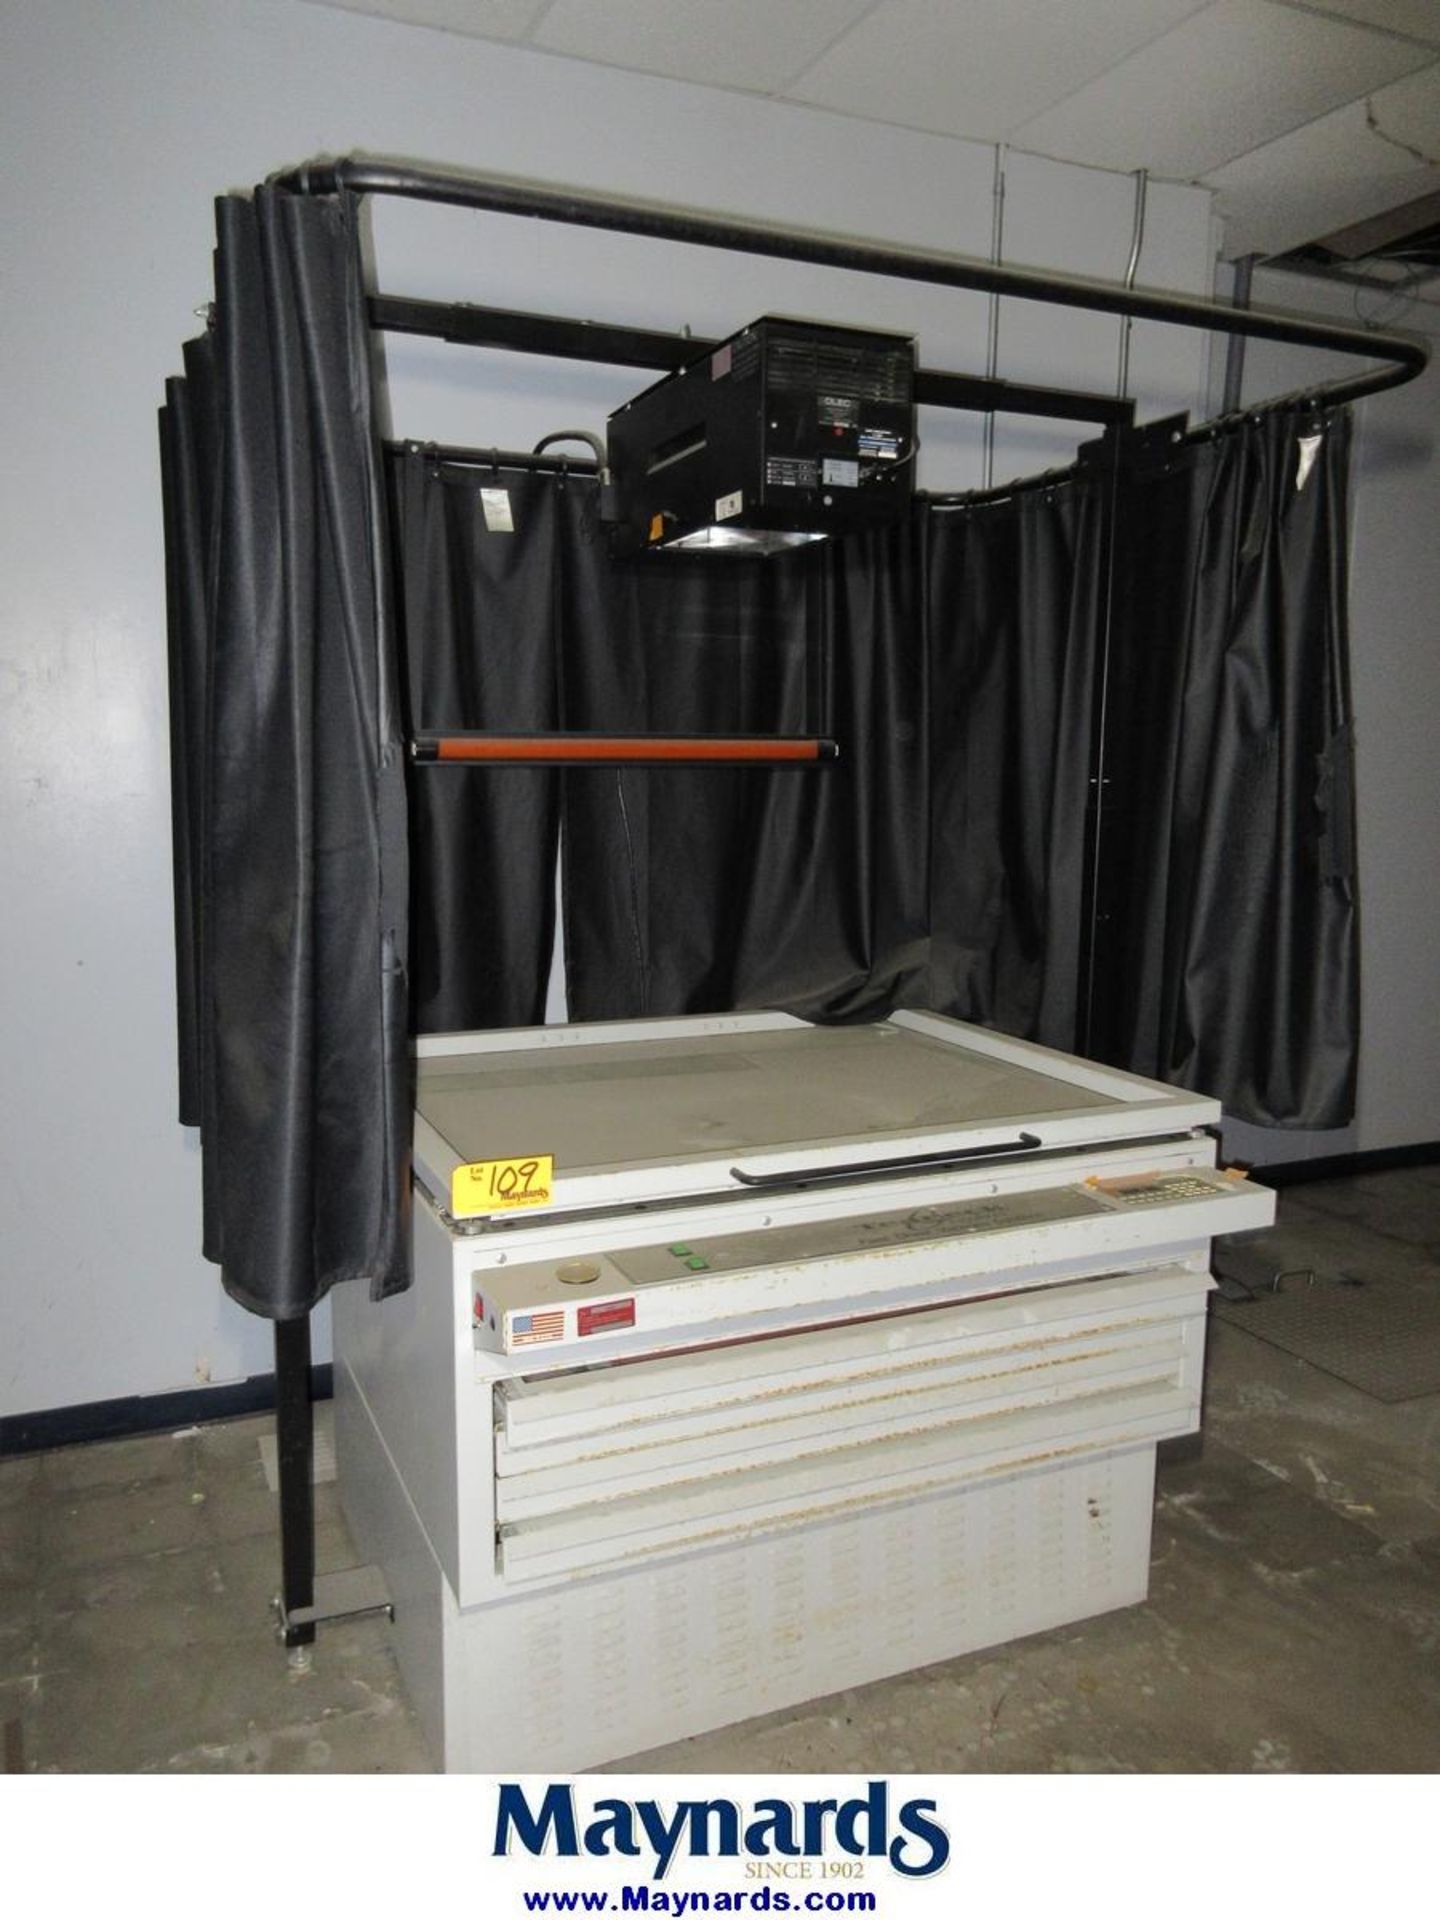 Teaneck Graphics 42"x36" Fast Draw Vacuum System